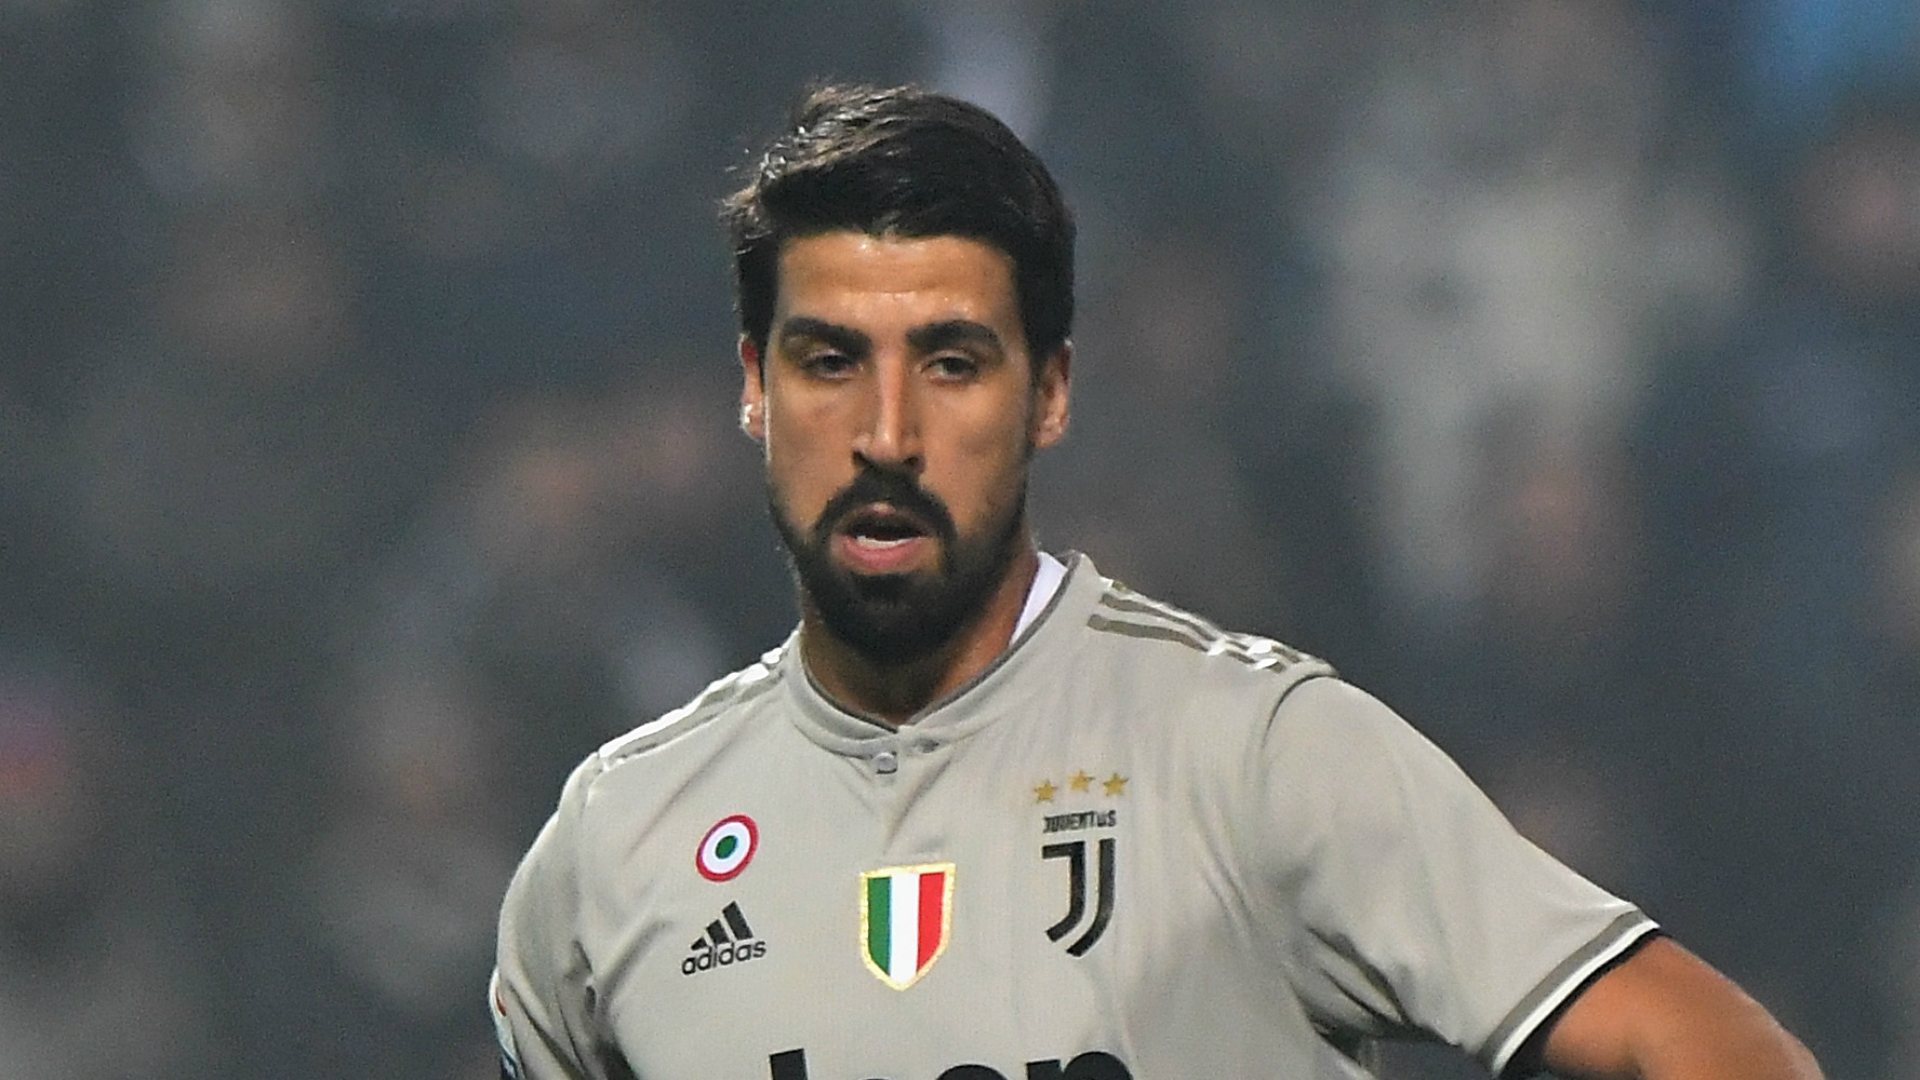 Sami Khedira is set for a spell on the sidelines after Juventus confirmed he will visit Augsburg for a knee operation.